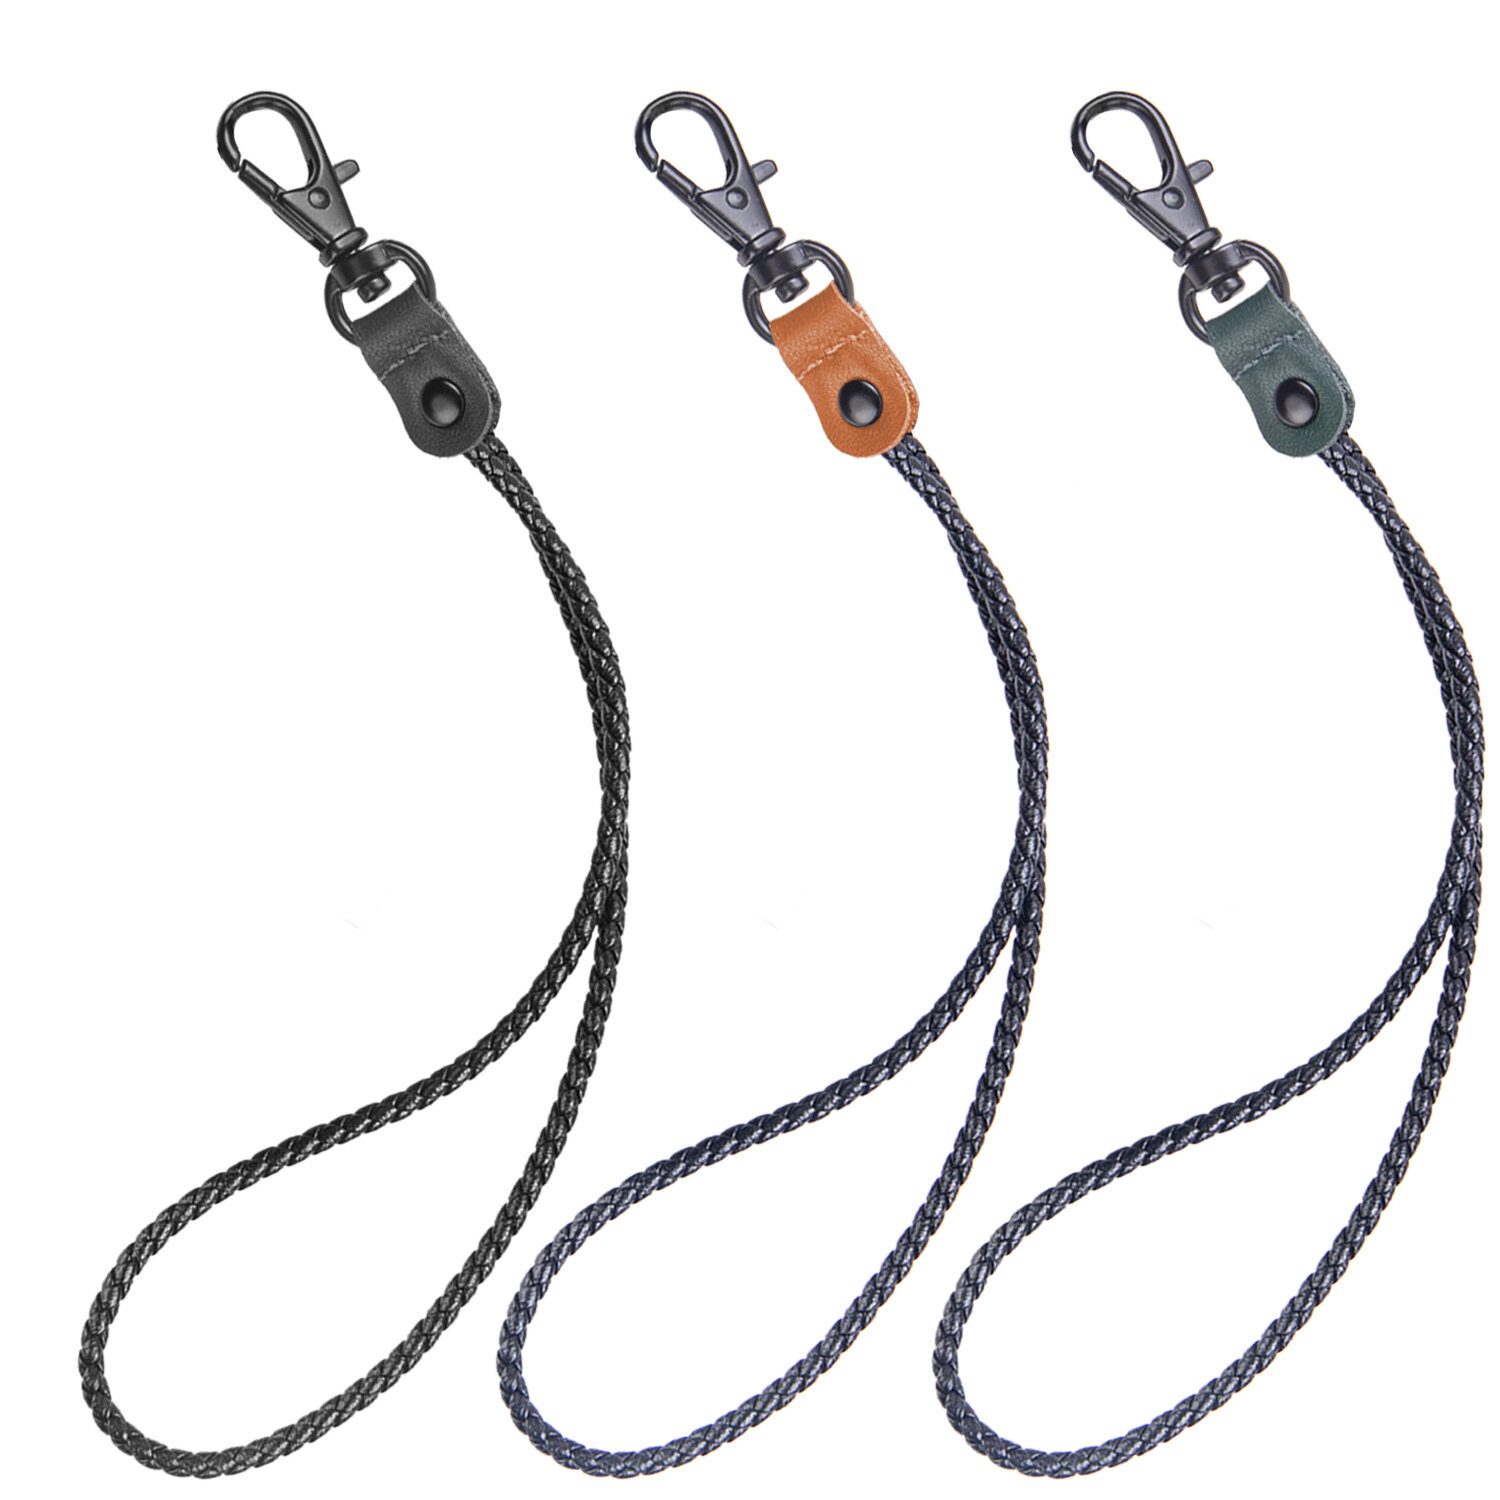 

Bakeey Universal Phone Lanyard Length Adjustable Neck Cord Strap Cell Phone Lanyards Compatible with Most Smartphones